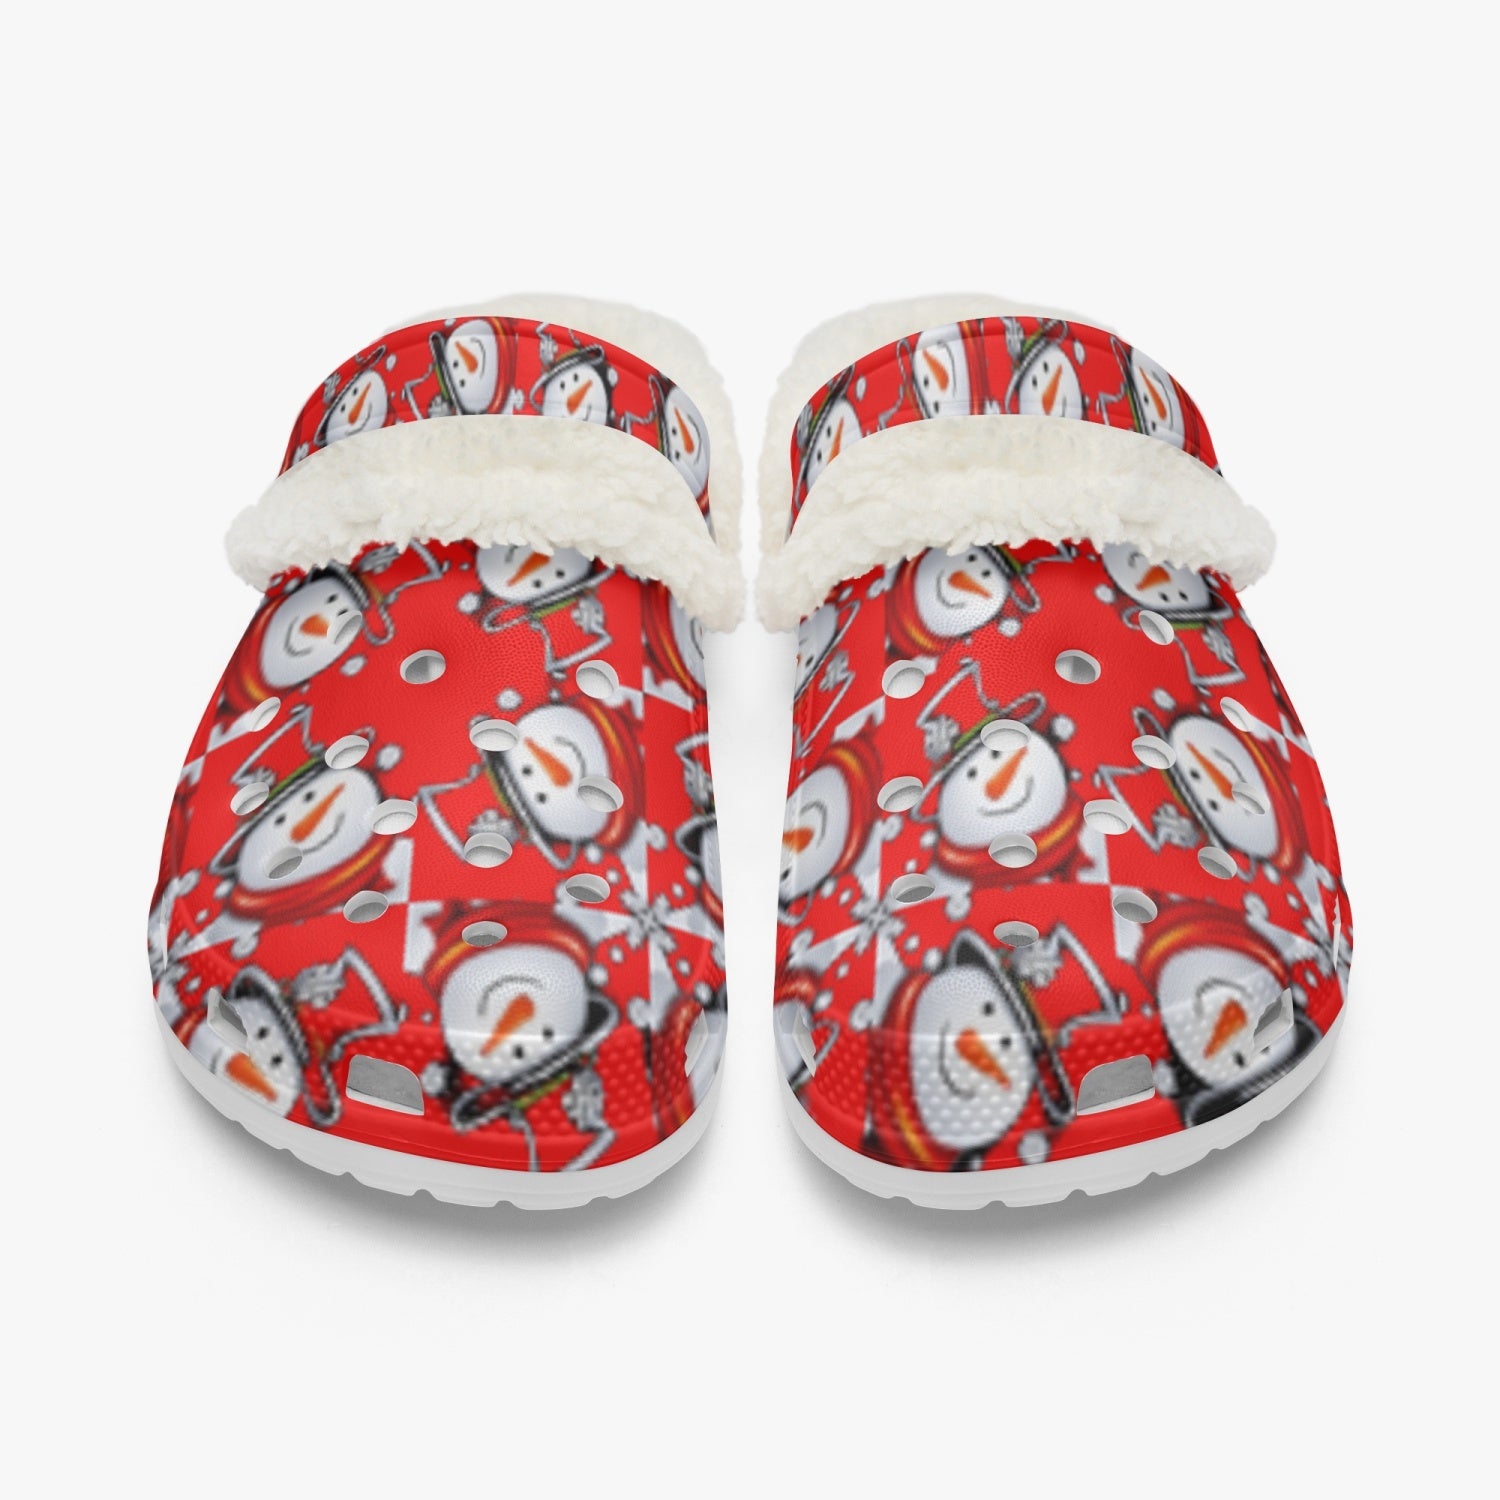 White Snow Man's Delight Fuzzy Lined Christmas Clogs - 2 colors - women's clogs at TFC&H Co.